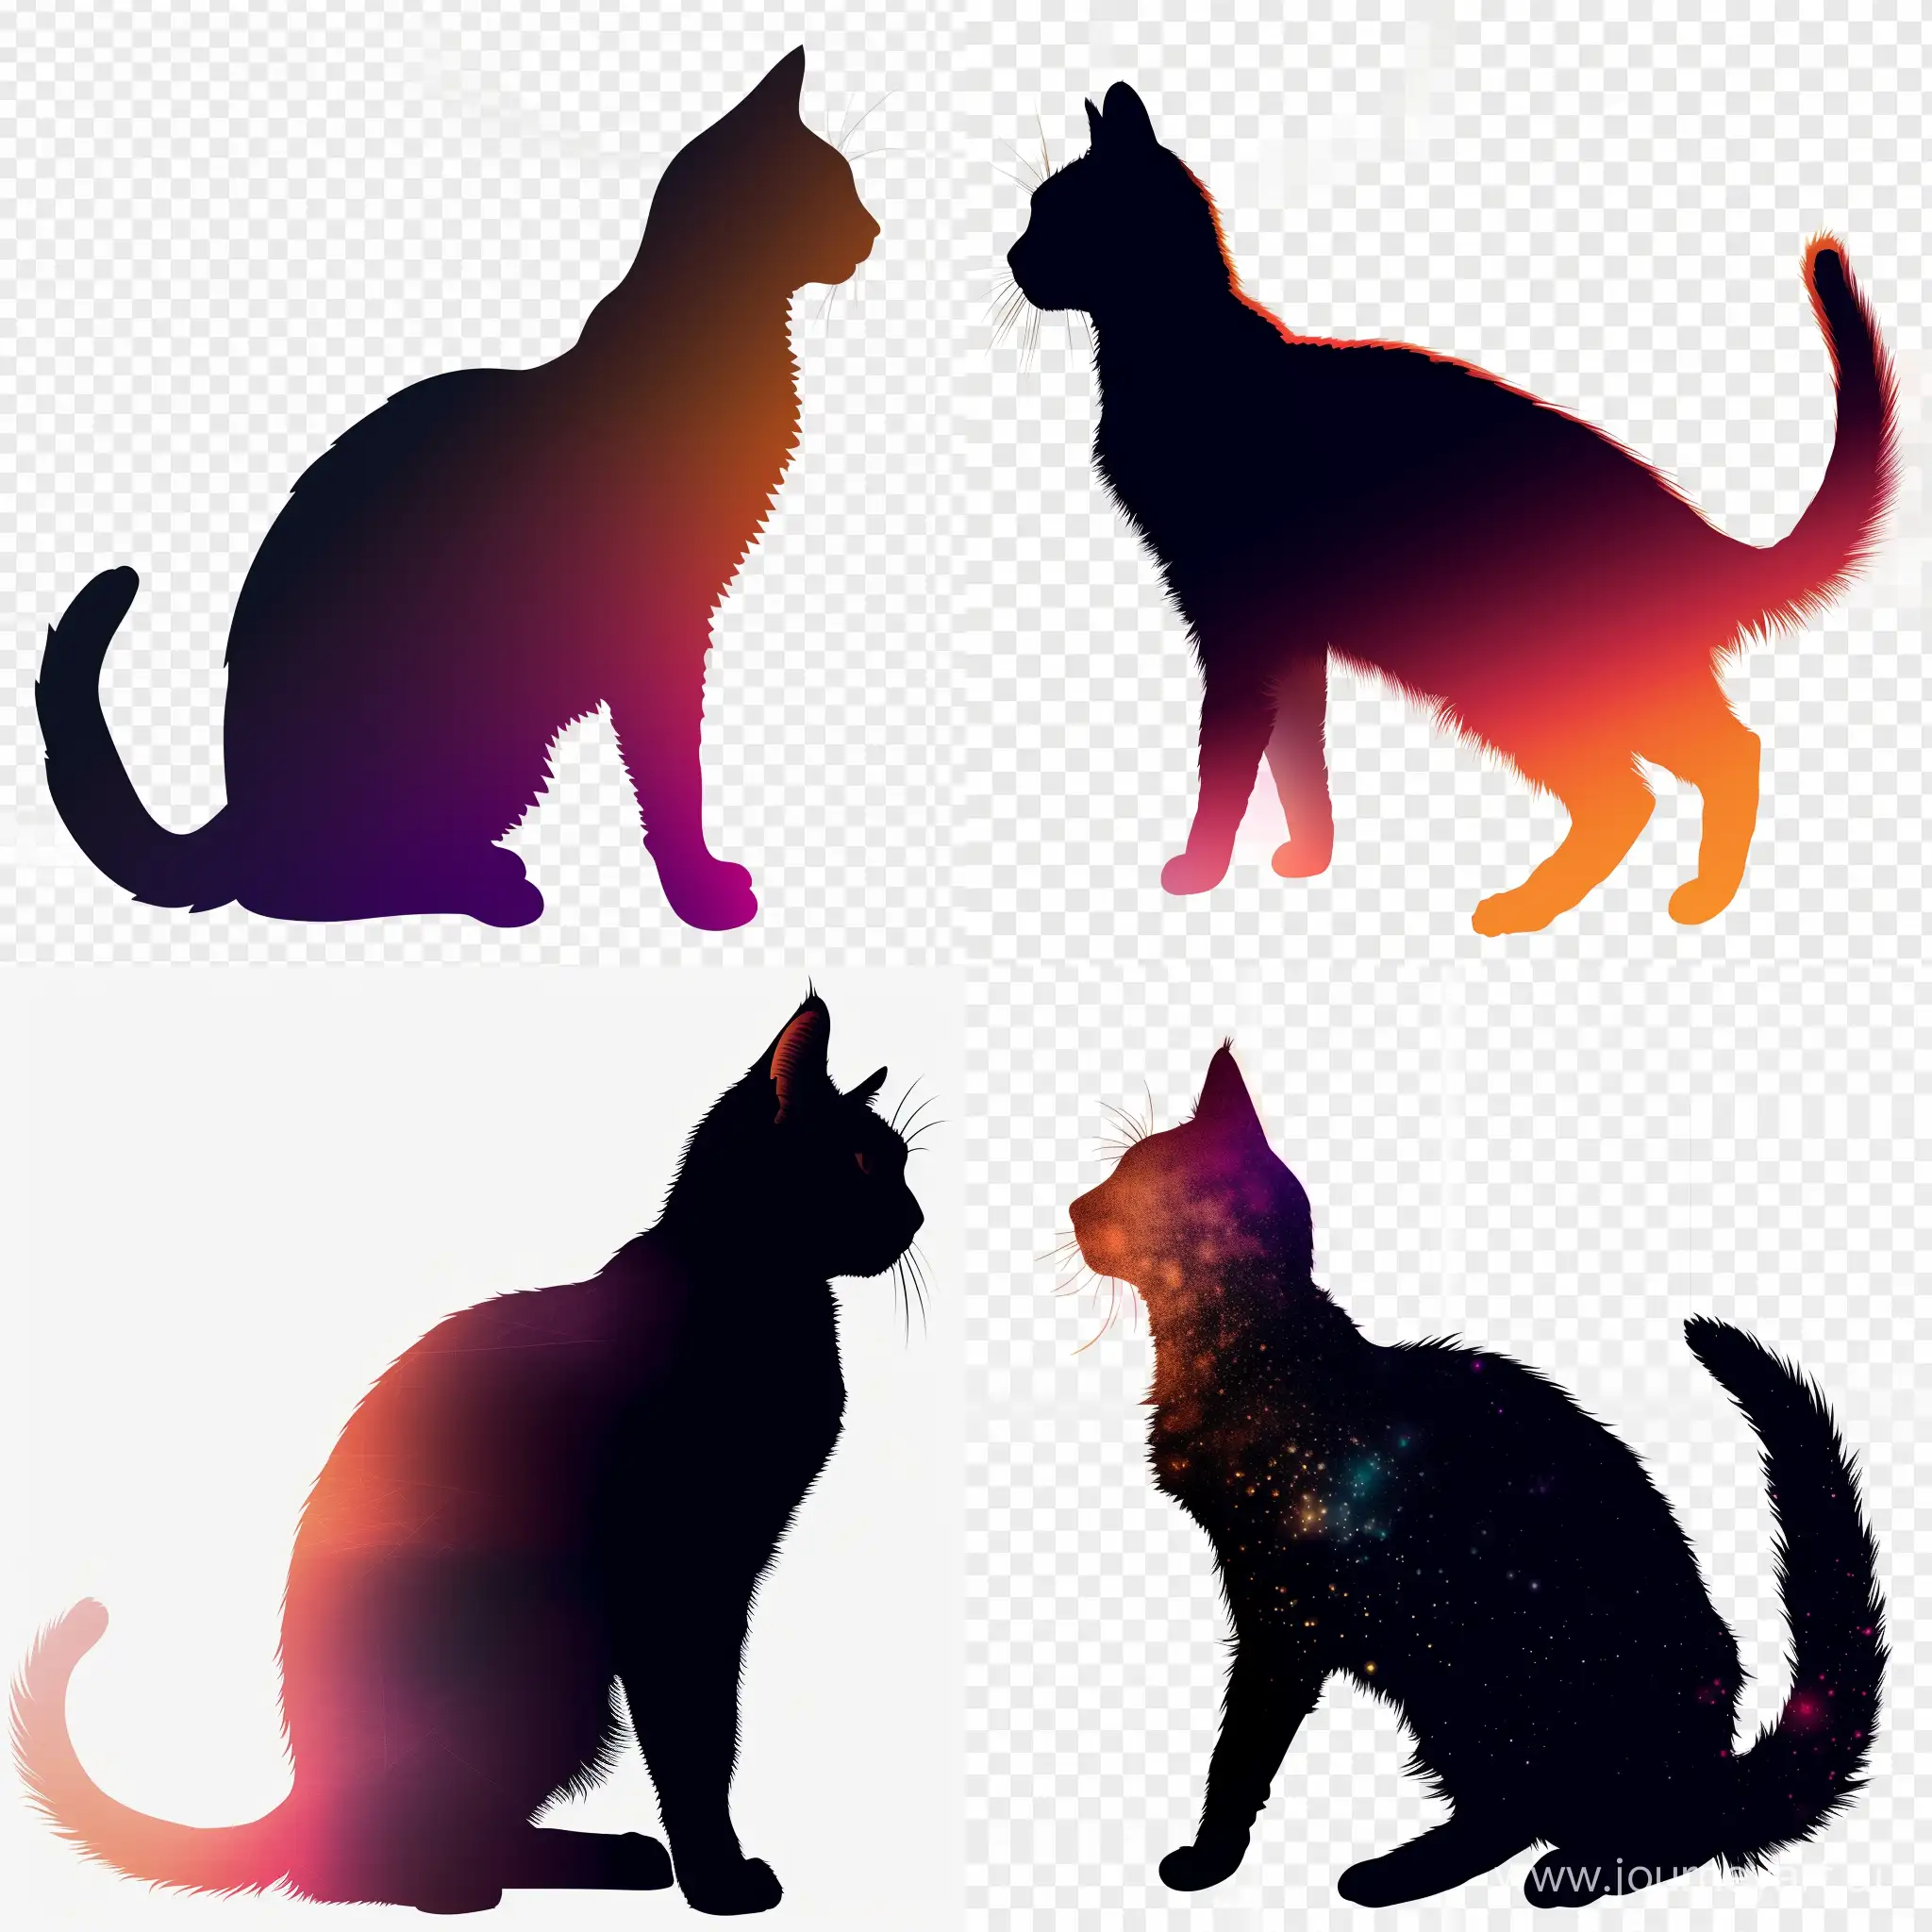 Abstract-Cat-Silhouette-Gradient-Art-on-Transparent-Background